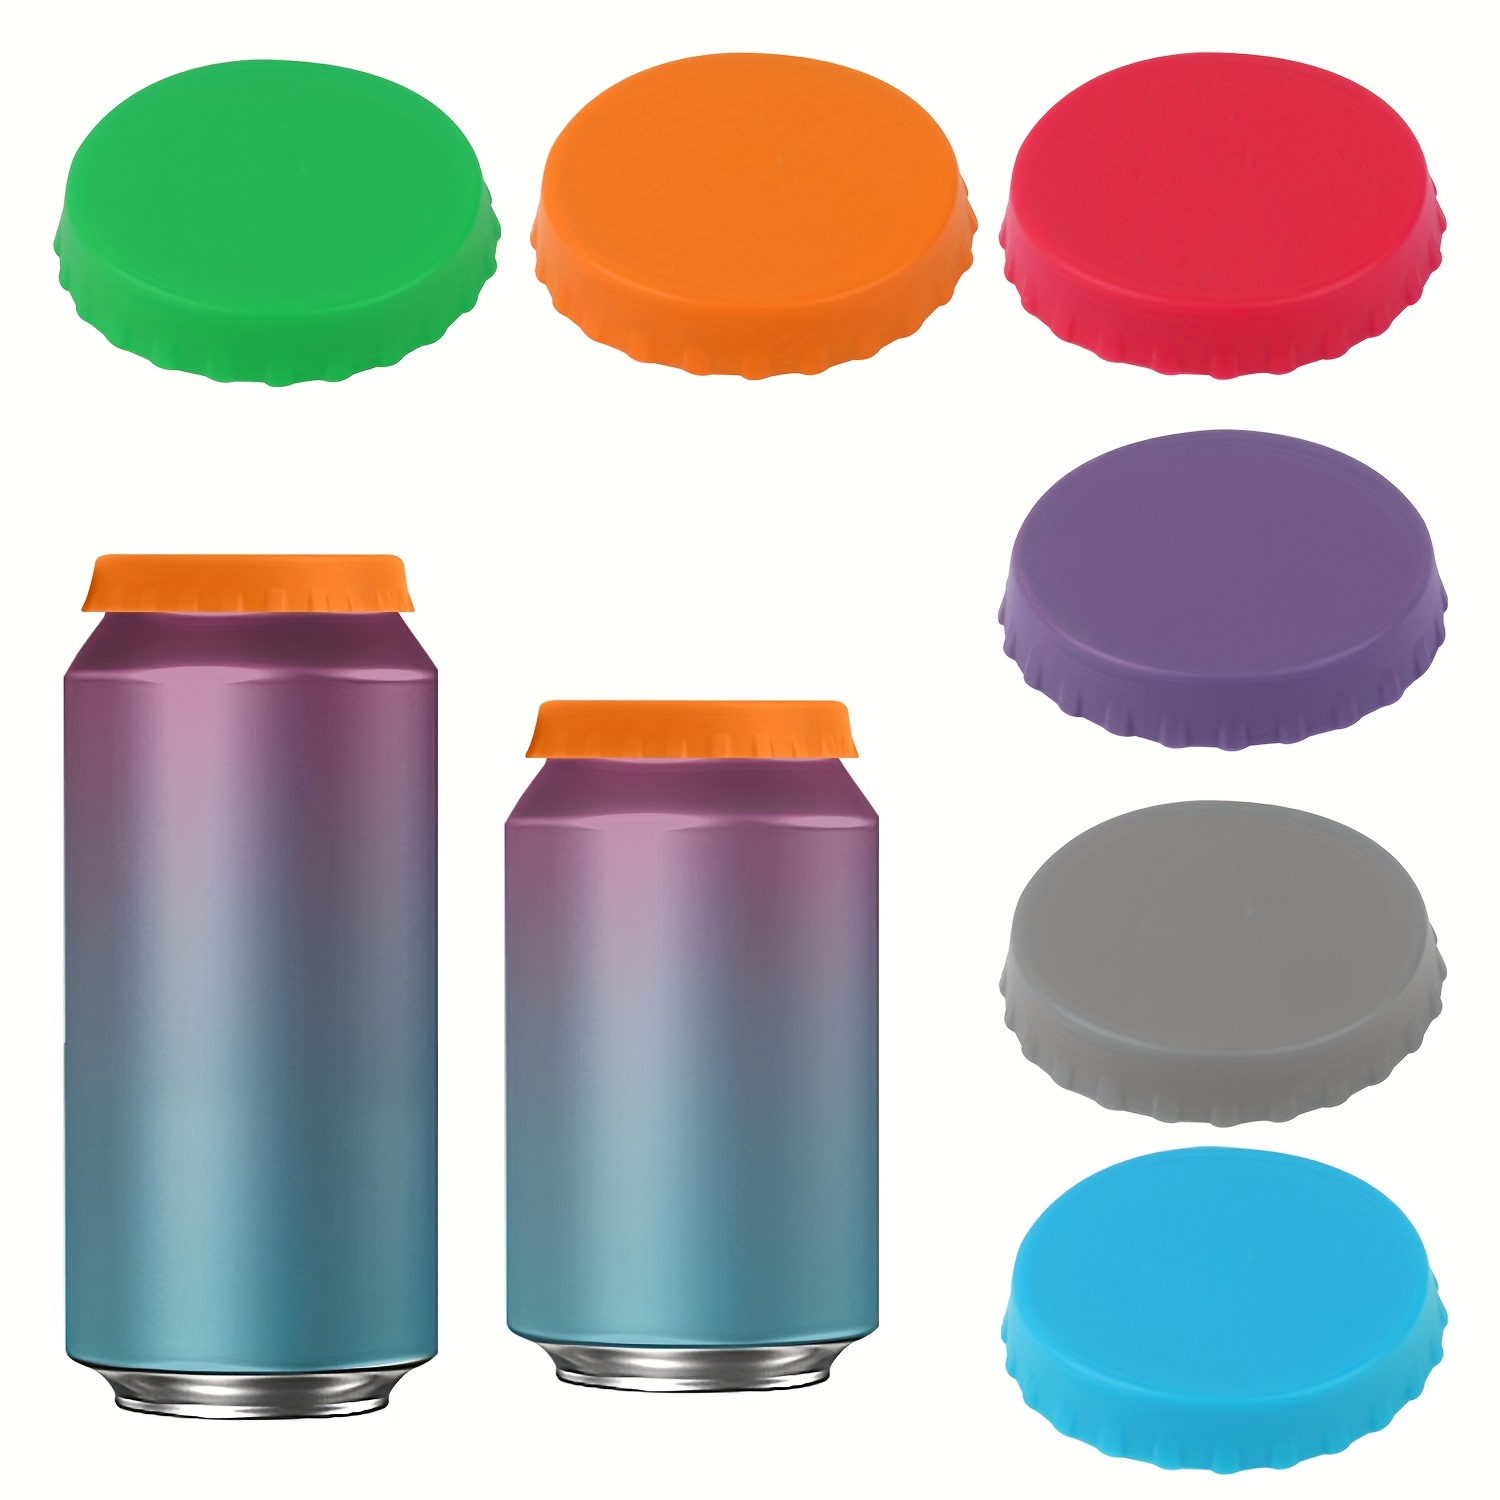 Zoylofg Silicone Soda Can Lids, Beer Can Lids Spill Resistant Food